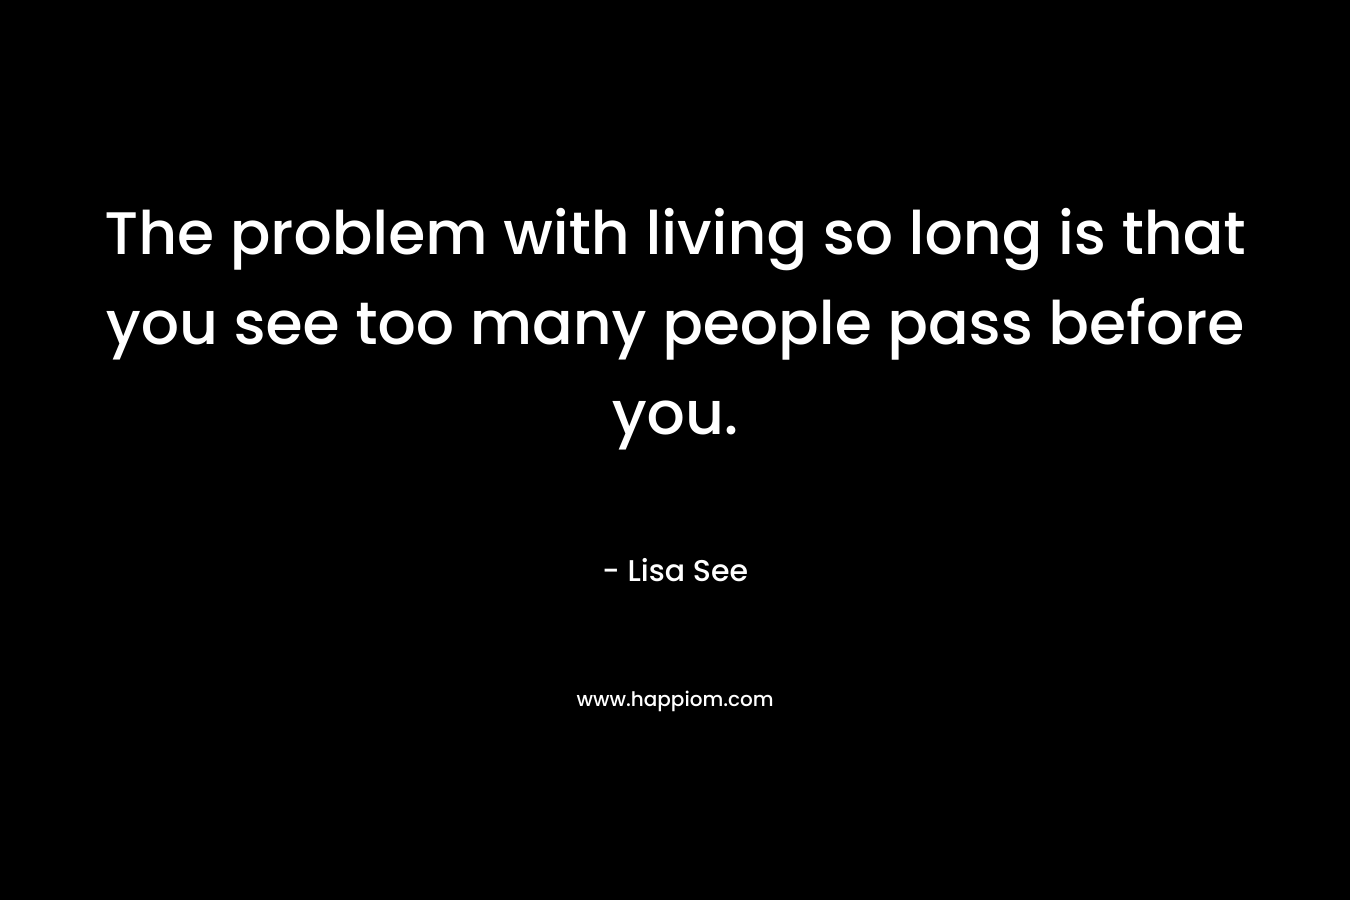 The problem with living so long is that you see too many people pass before you.